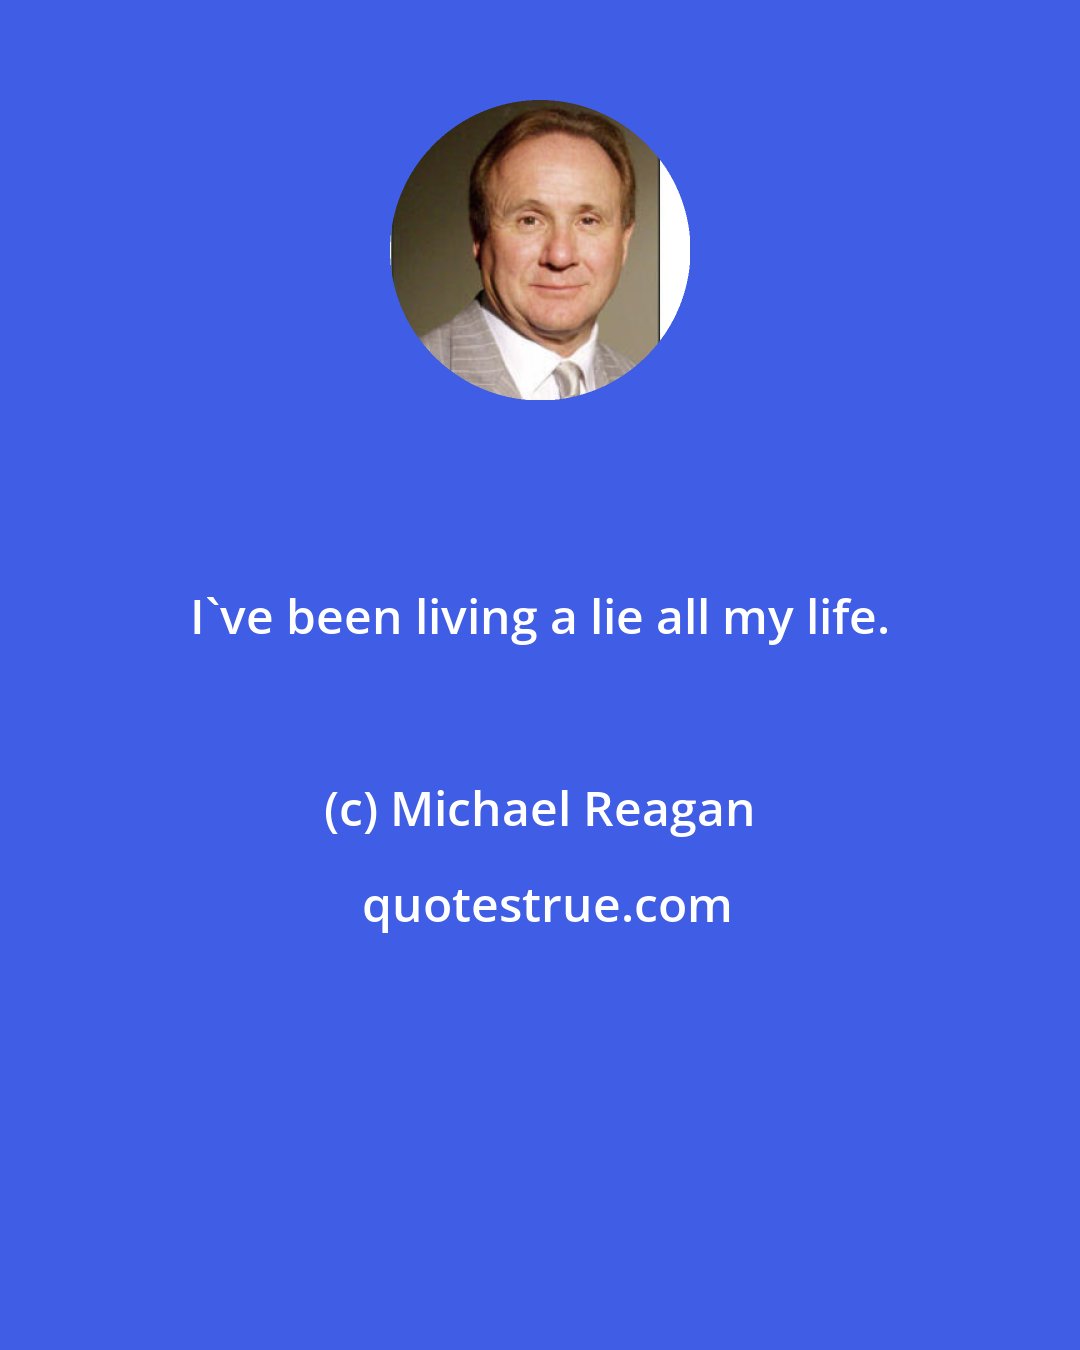 Michael Reagan: I've been living a lie all my life.